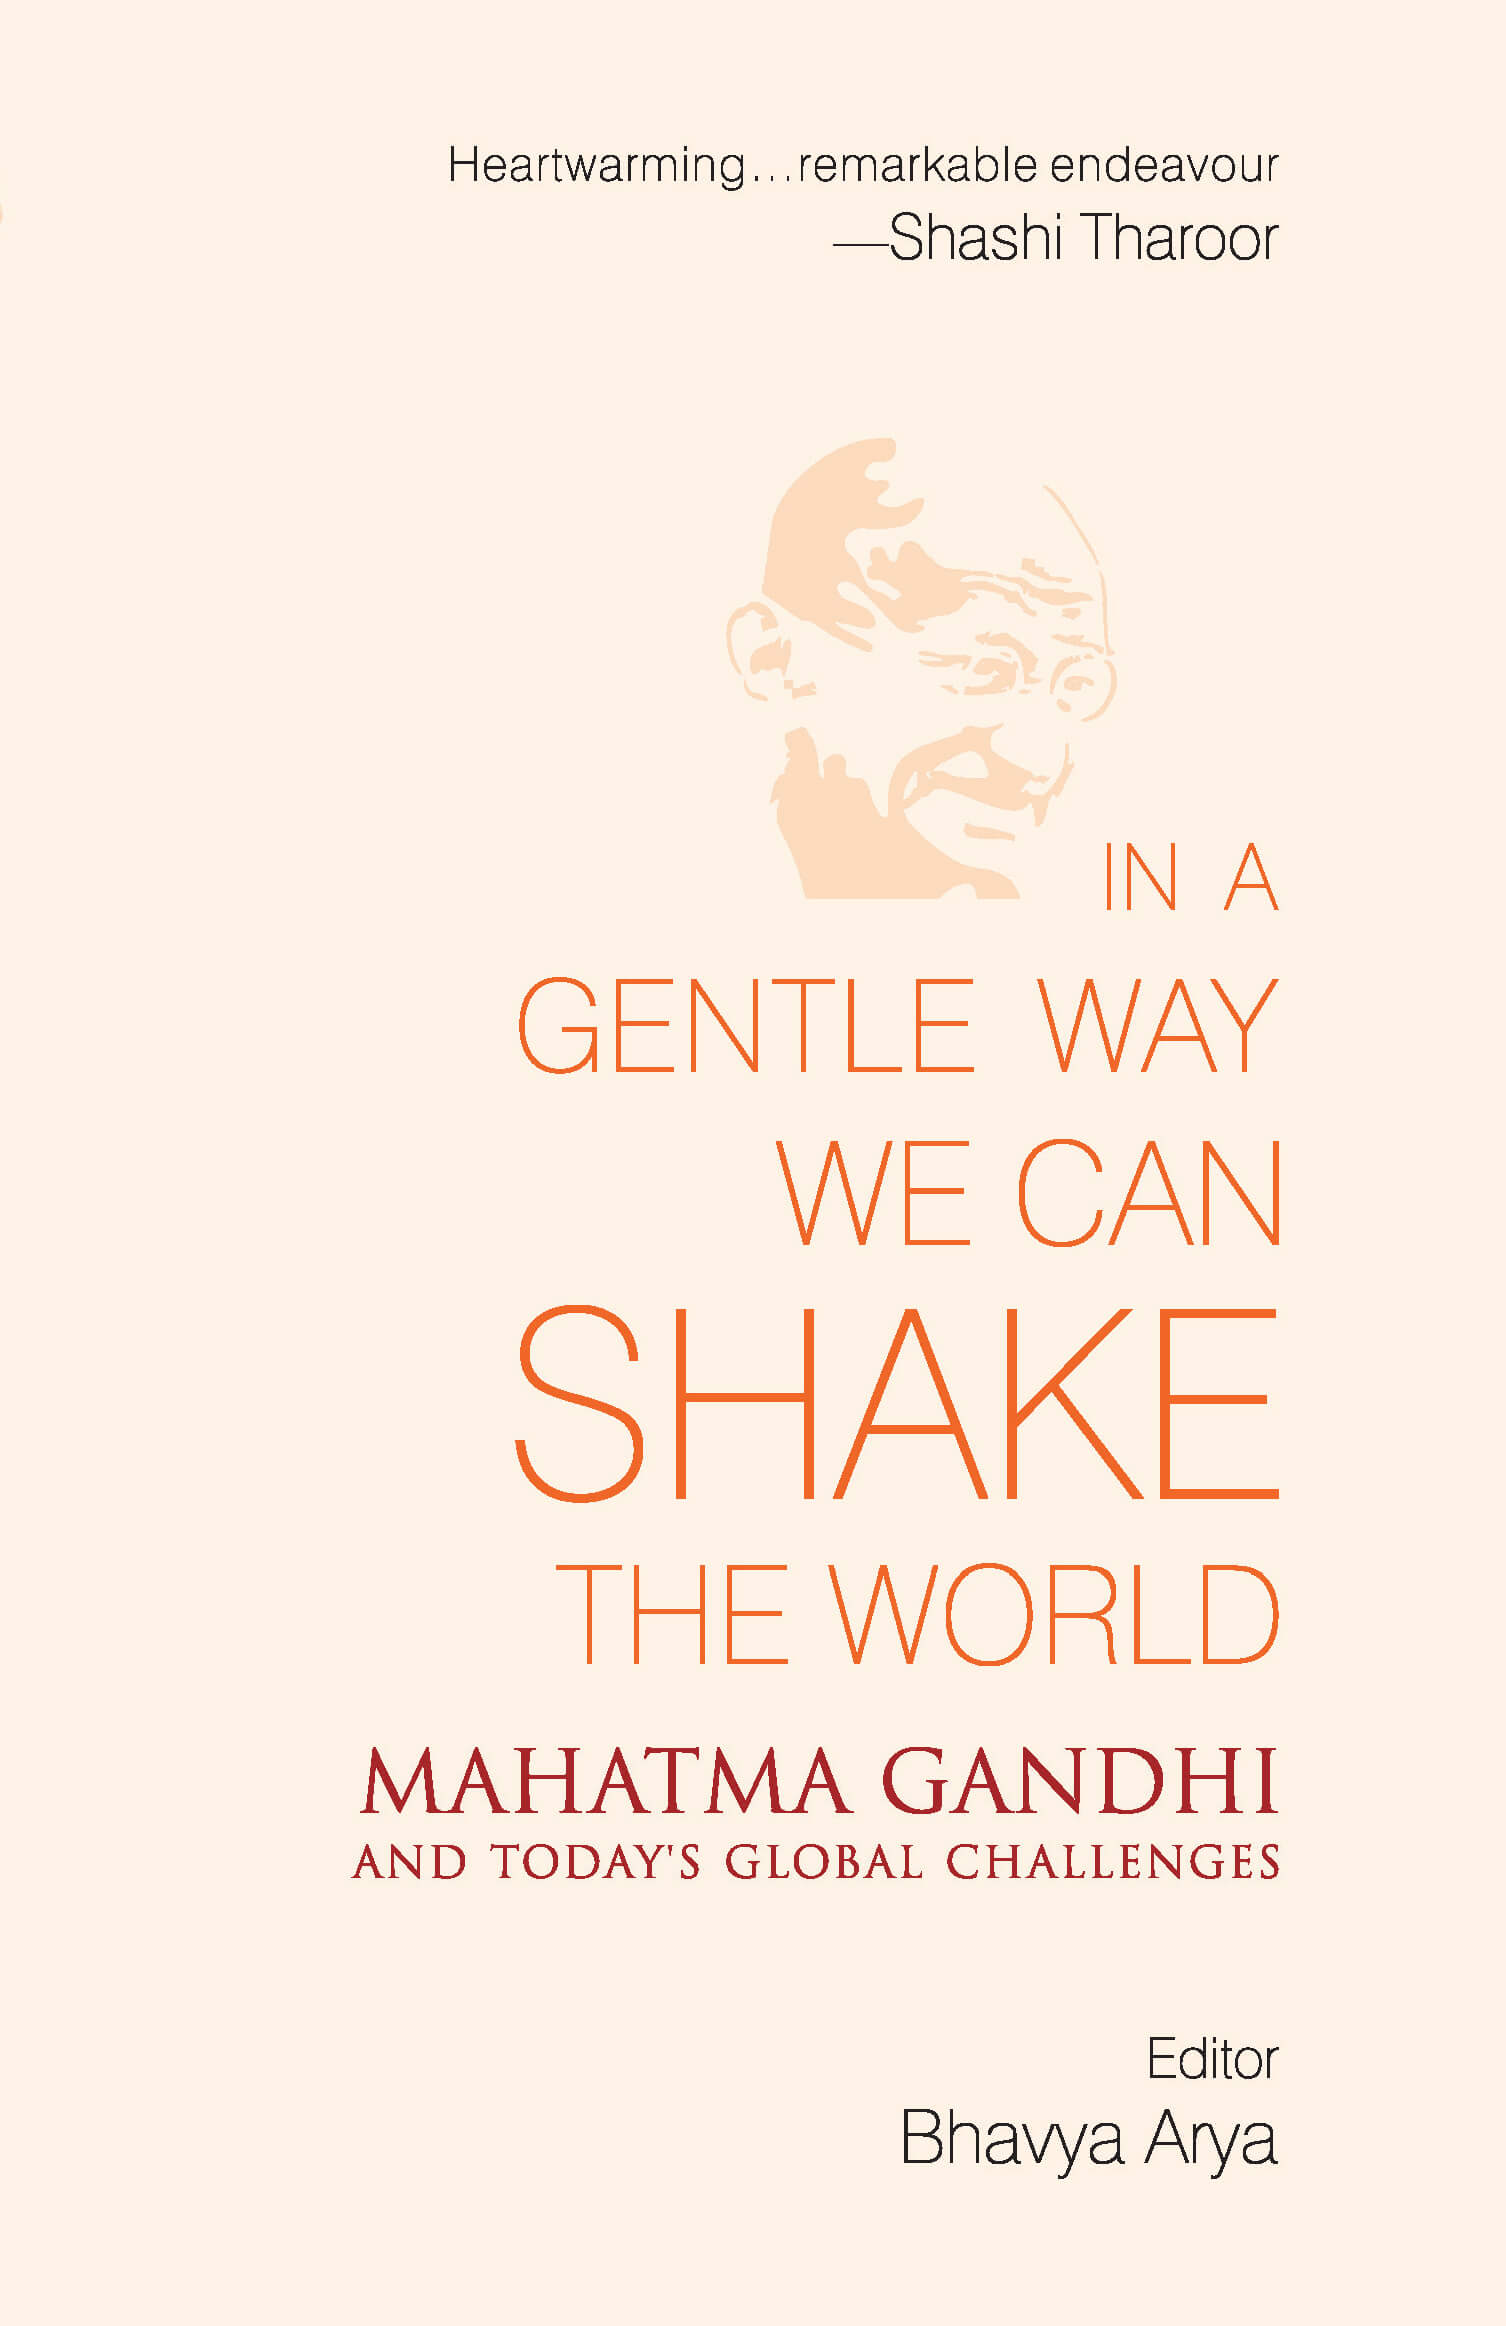 In A Gentle Way We Can Shake The World: Mahatma Gandhi And Today's Global Challenges